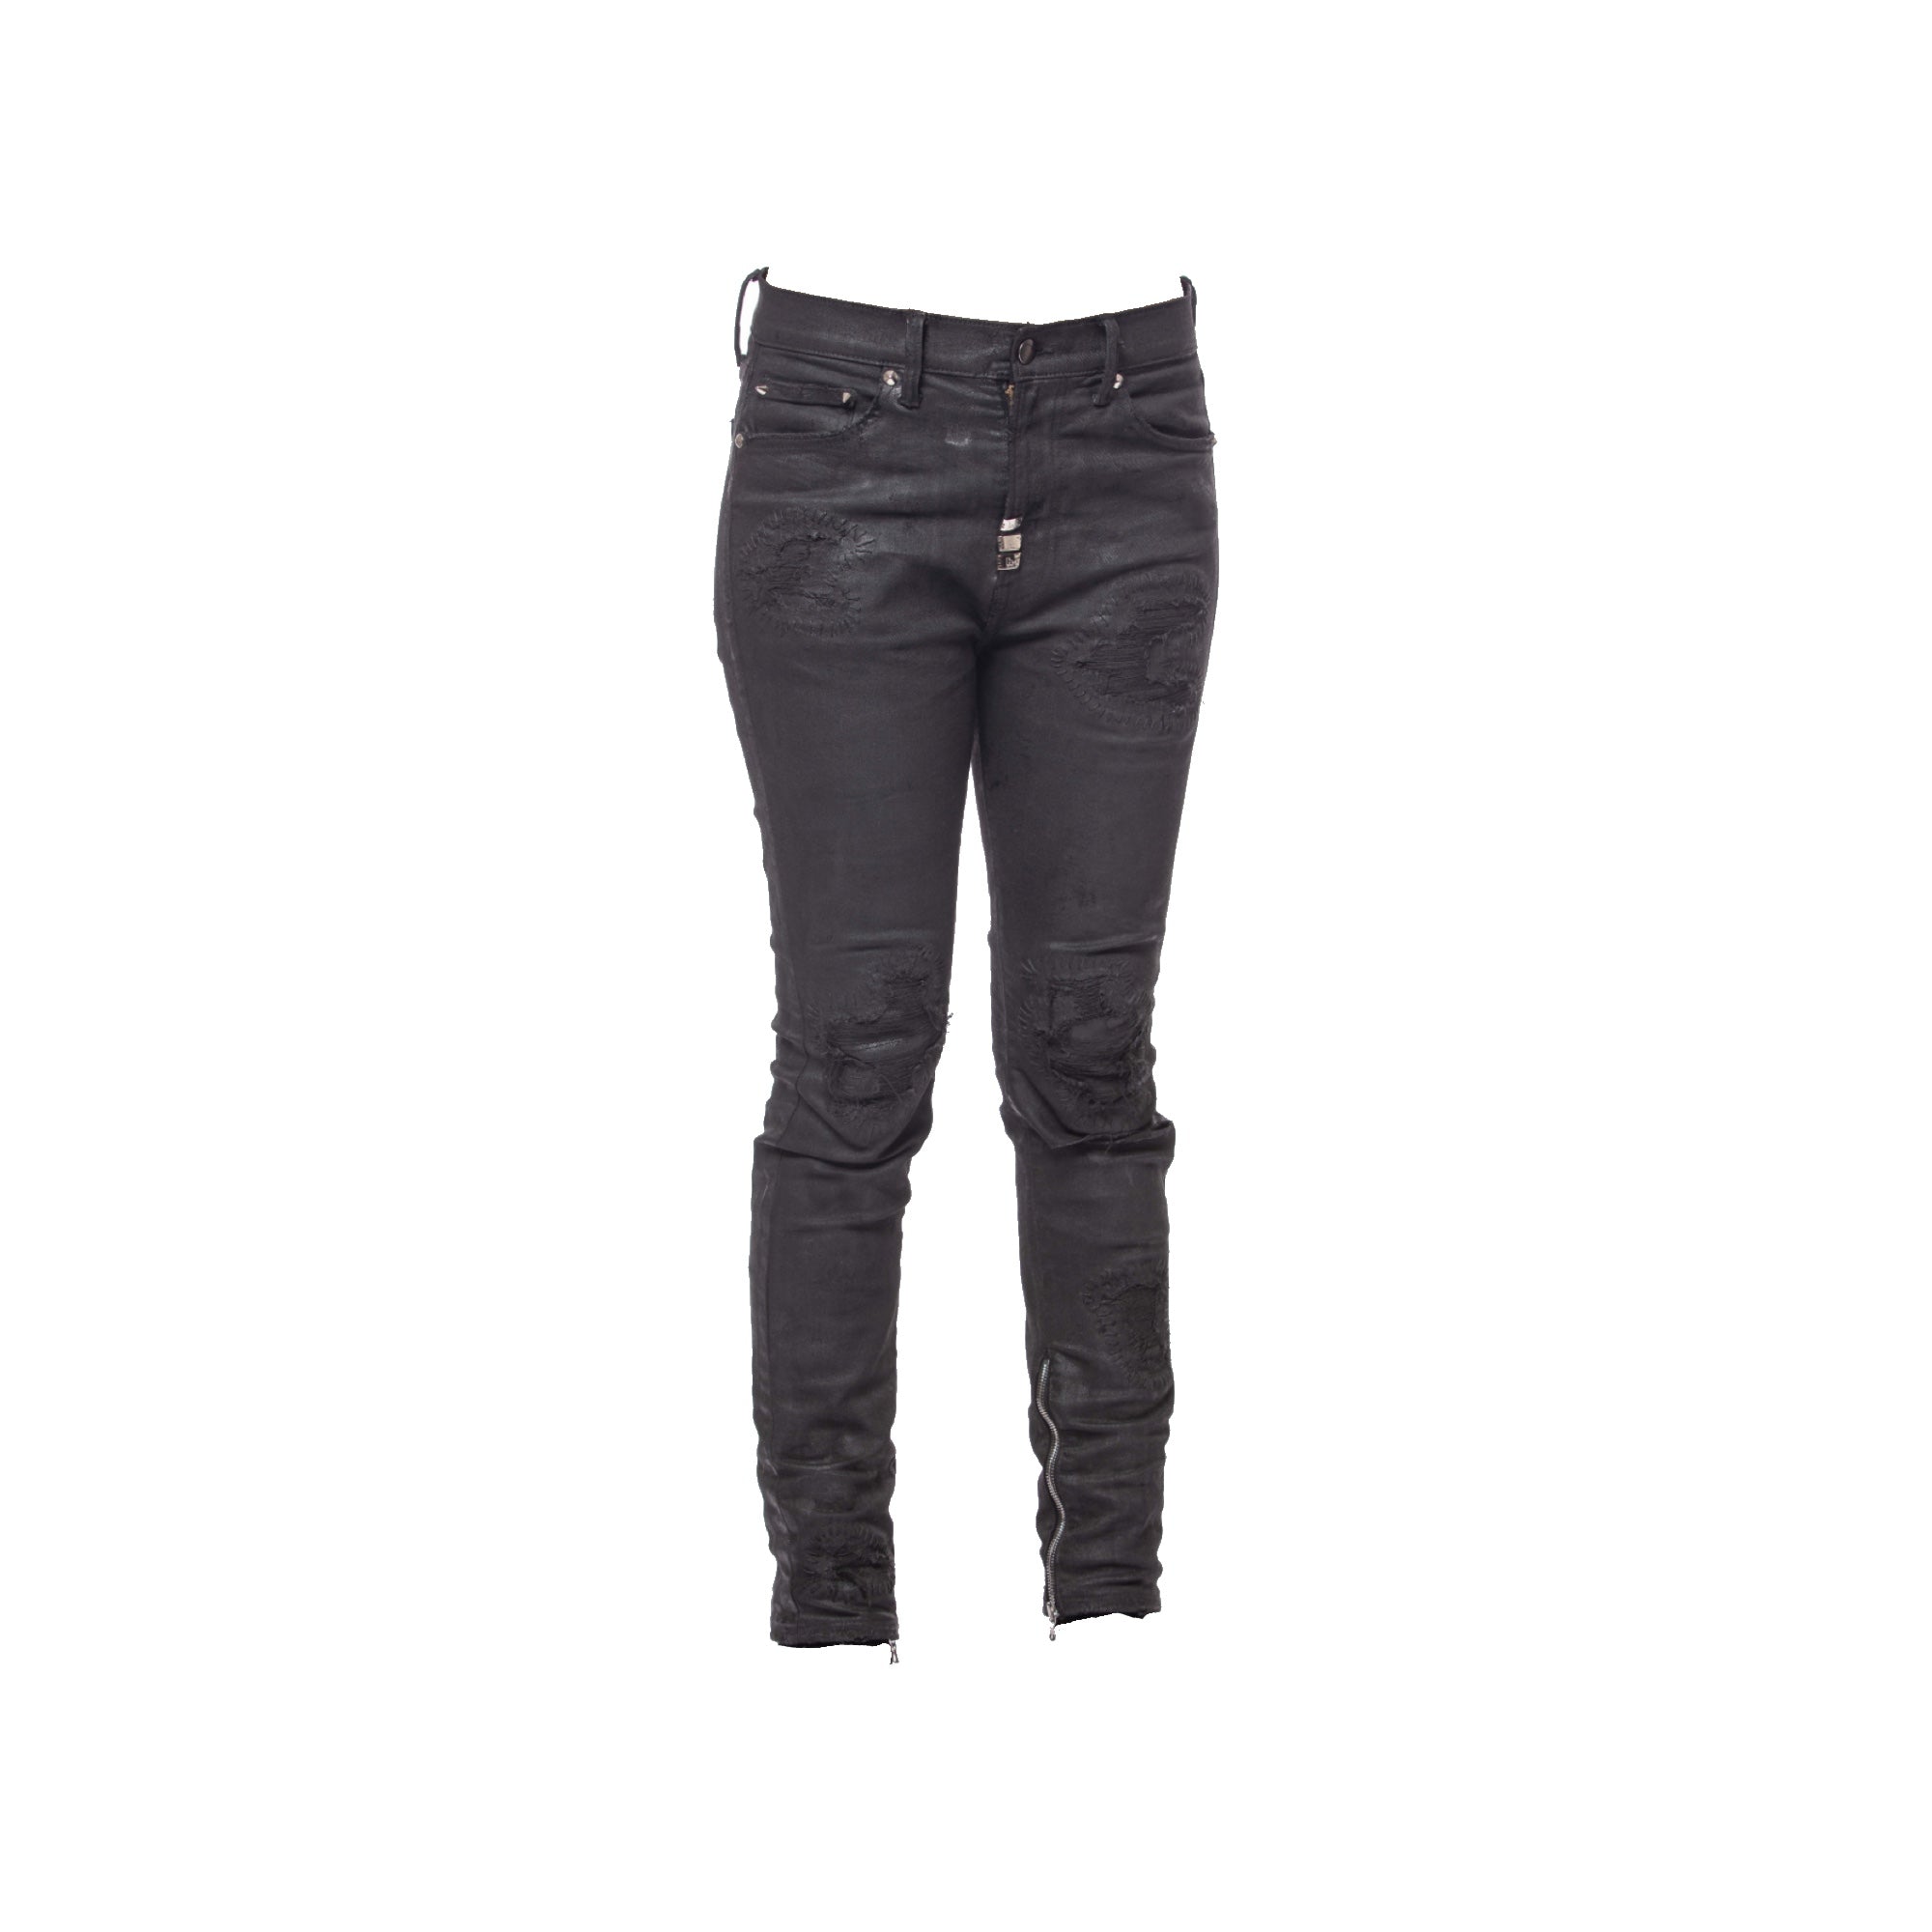 DISTRESSED COATED JEANS